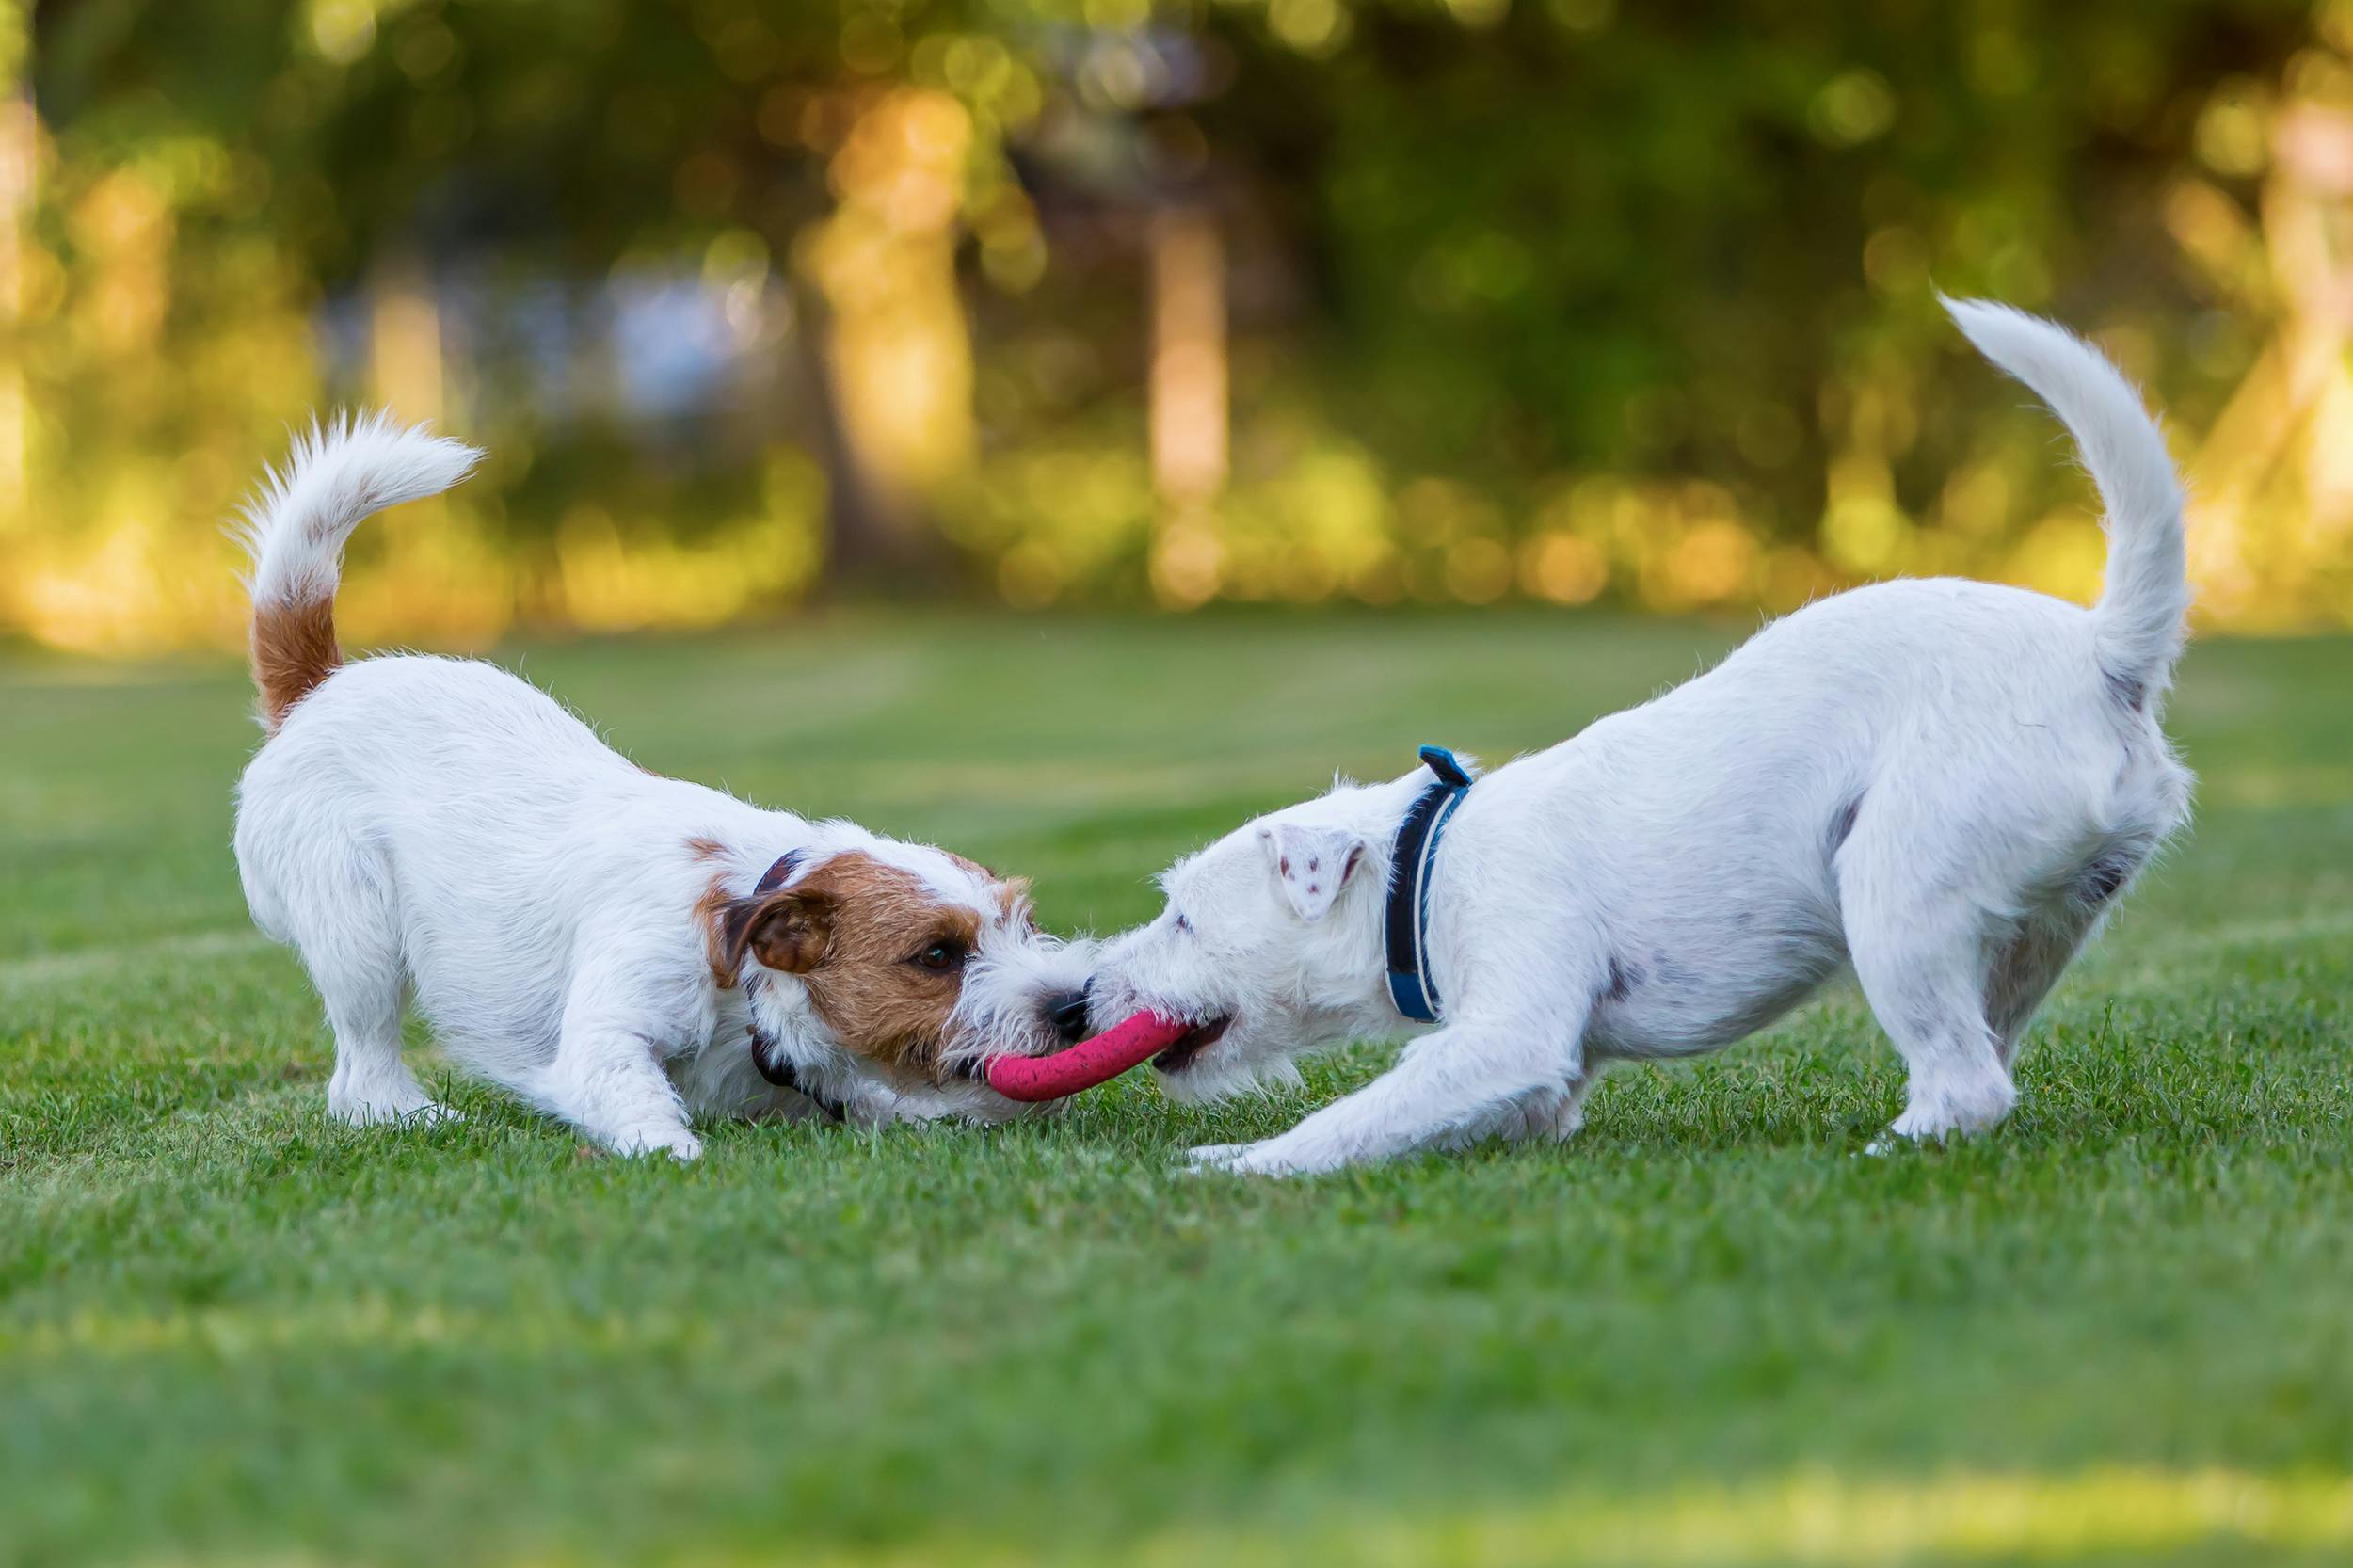 Two small dogs playing together in a park.